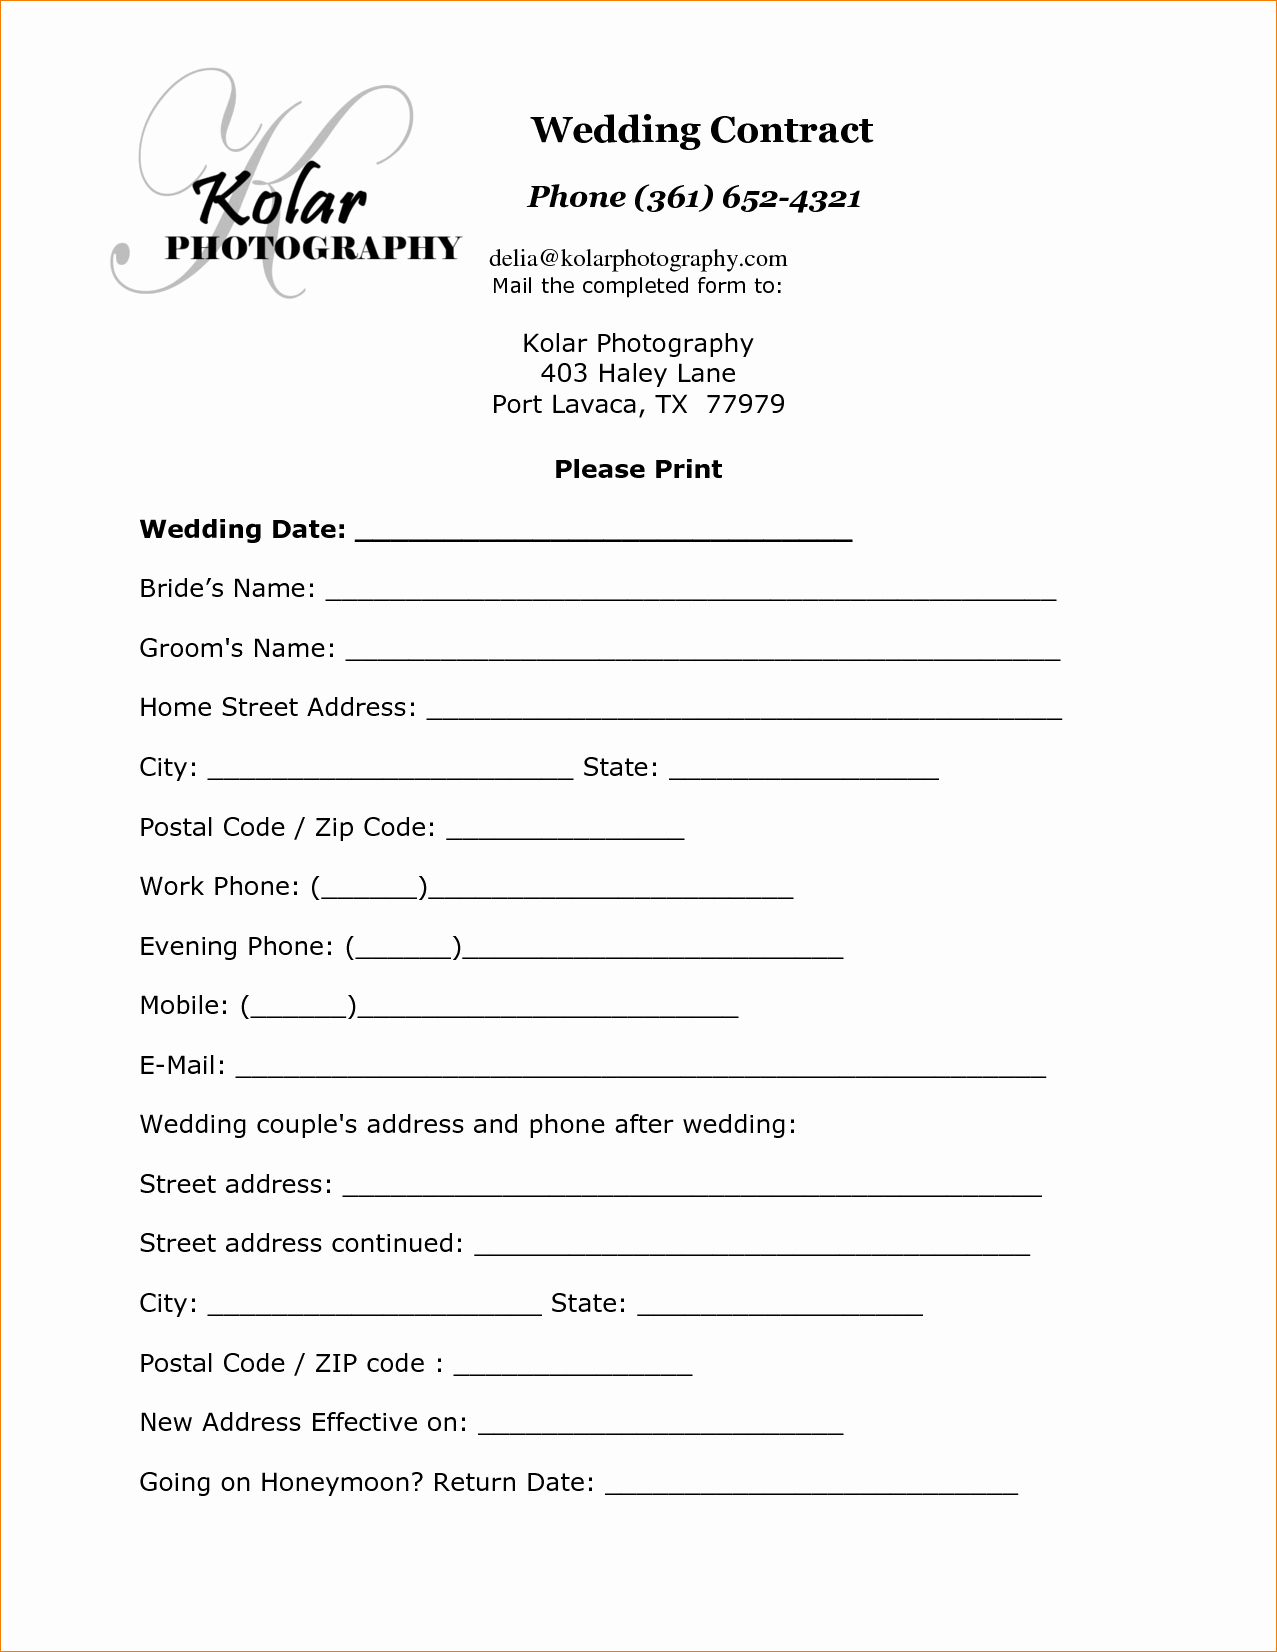 5 Wedding Graphy Contract Template